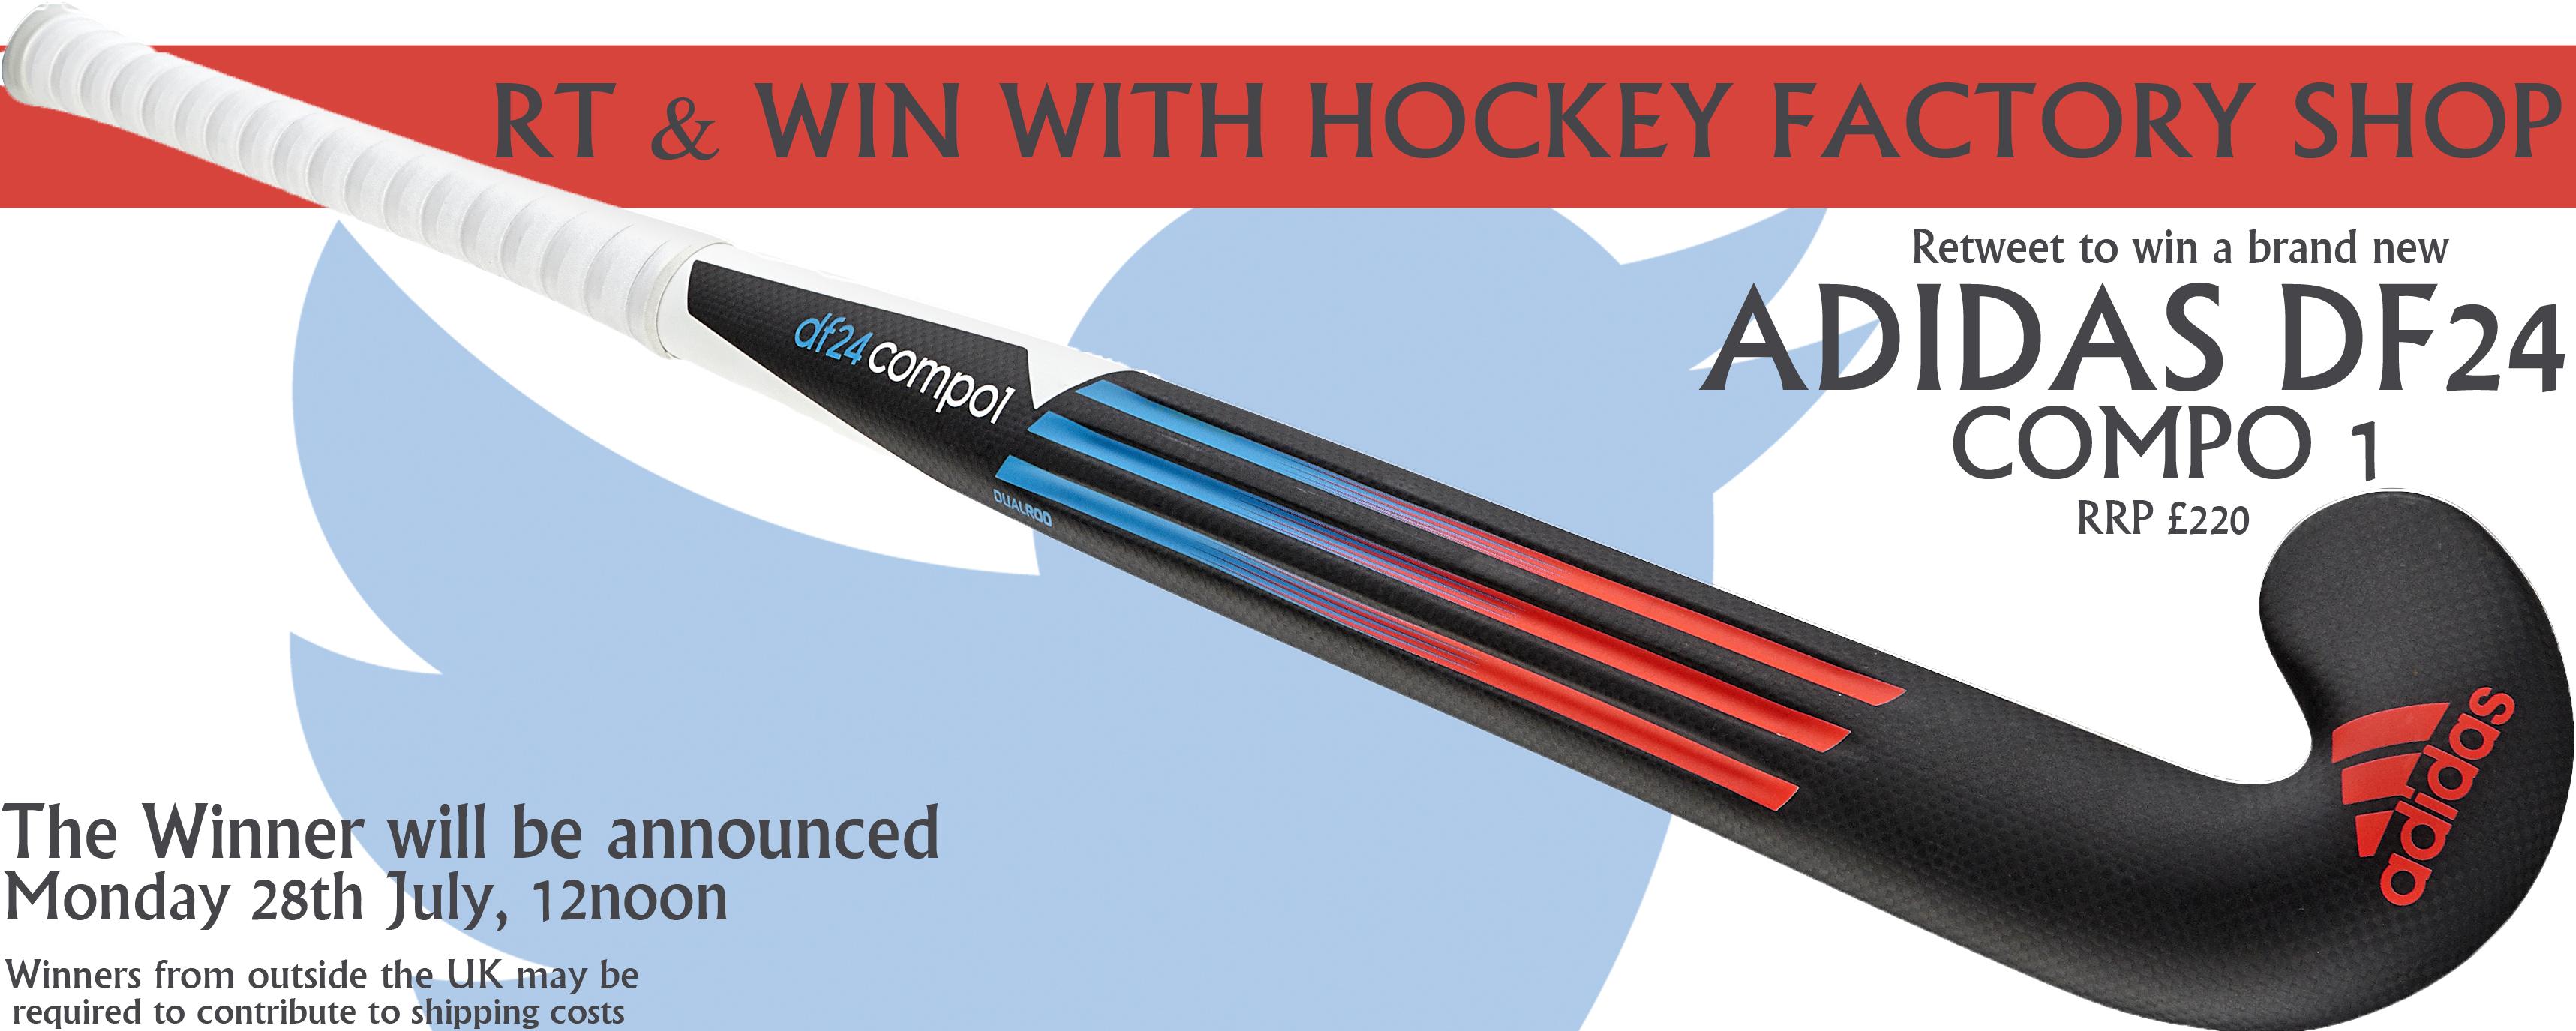 Sport achtergrond menu Hockey Factory Shop on Twitter: "WIN an Adidas DF24 Compo 1 Stick! To  enter, retweet this tweet before Monday 12pm (RRP £220) @adidas_Hockey  @adidasUK http://t.co/Ckr7vYDN9o" / Twitter